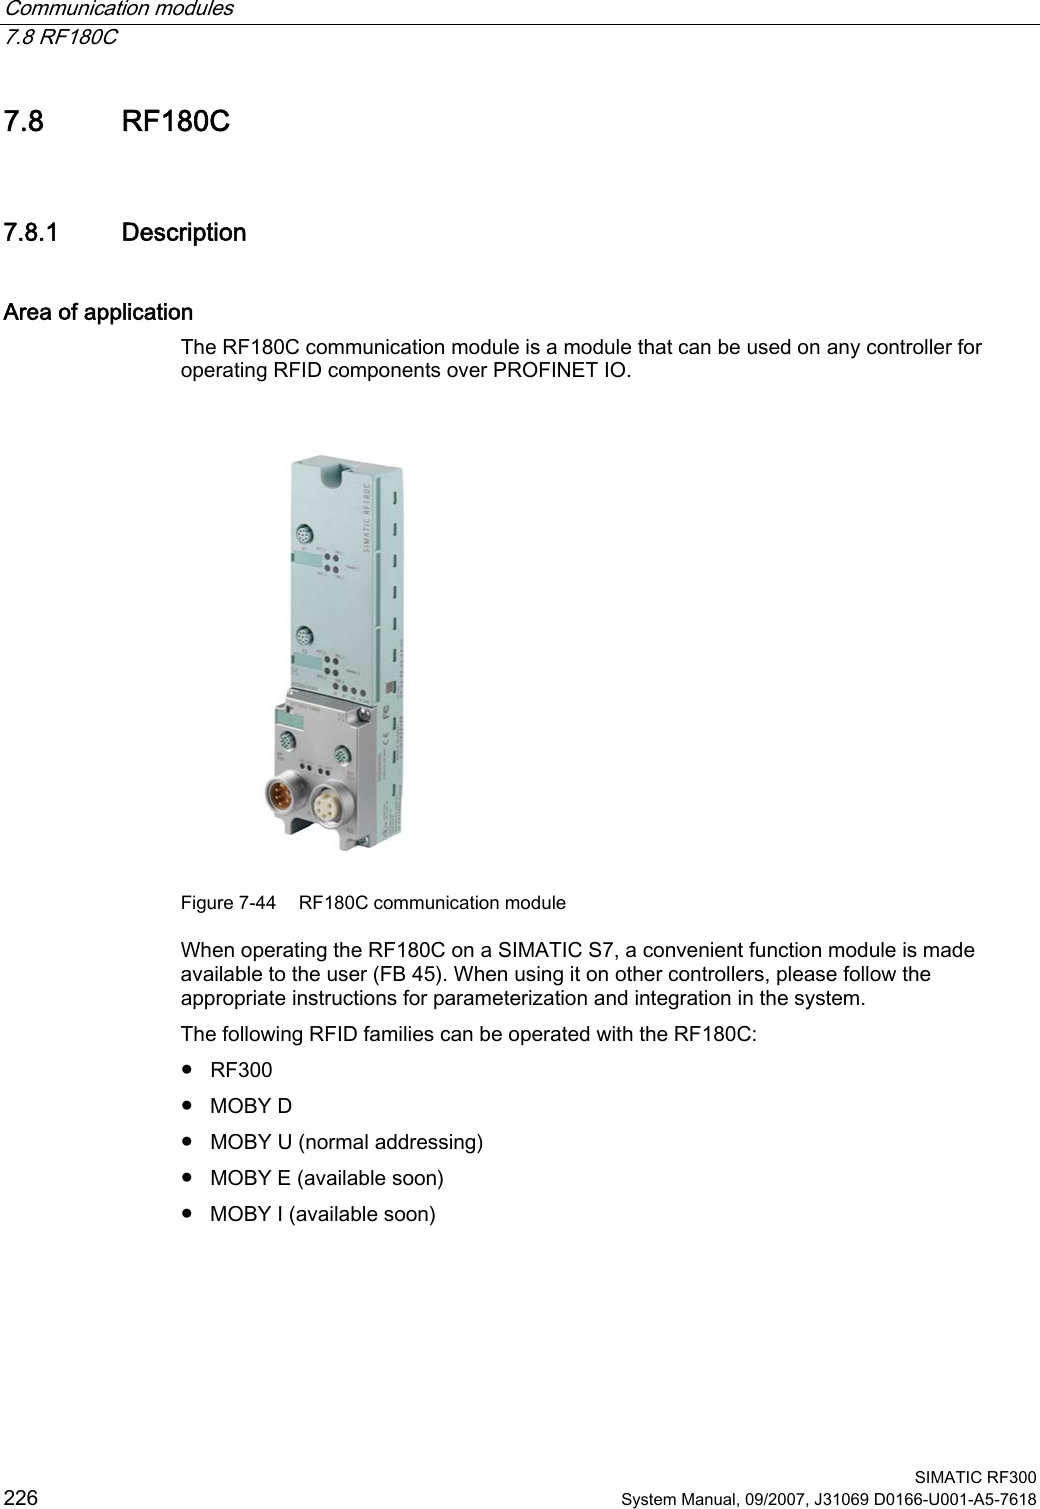 Communication modules   7.8 RF180C  SIMATIC RF300 226 System Manual, 09/2007, J31069 D0166-U001-A5-7618 7.8 RF180C 7.8.1 Description Area of application The RF180C communication module is a module that can be used on any controller for operating RFID components over PROFINET IO.  Figure 7-44  RF180C communication module When operating the RF180C on a SIMATIC S7, a convenient function module is made available to the user (FB 45). When using it on other controllers, please follow the appropriate instructions for parameterization and integration in the system. The following RFID families can be operated with the RF180C: ●  RF300 ●  MOBY D ●  MOBY U (normal addressing) ●  MOBY E (available soon) ●  MOBY I (available soon) 